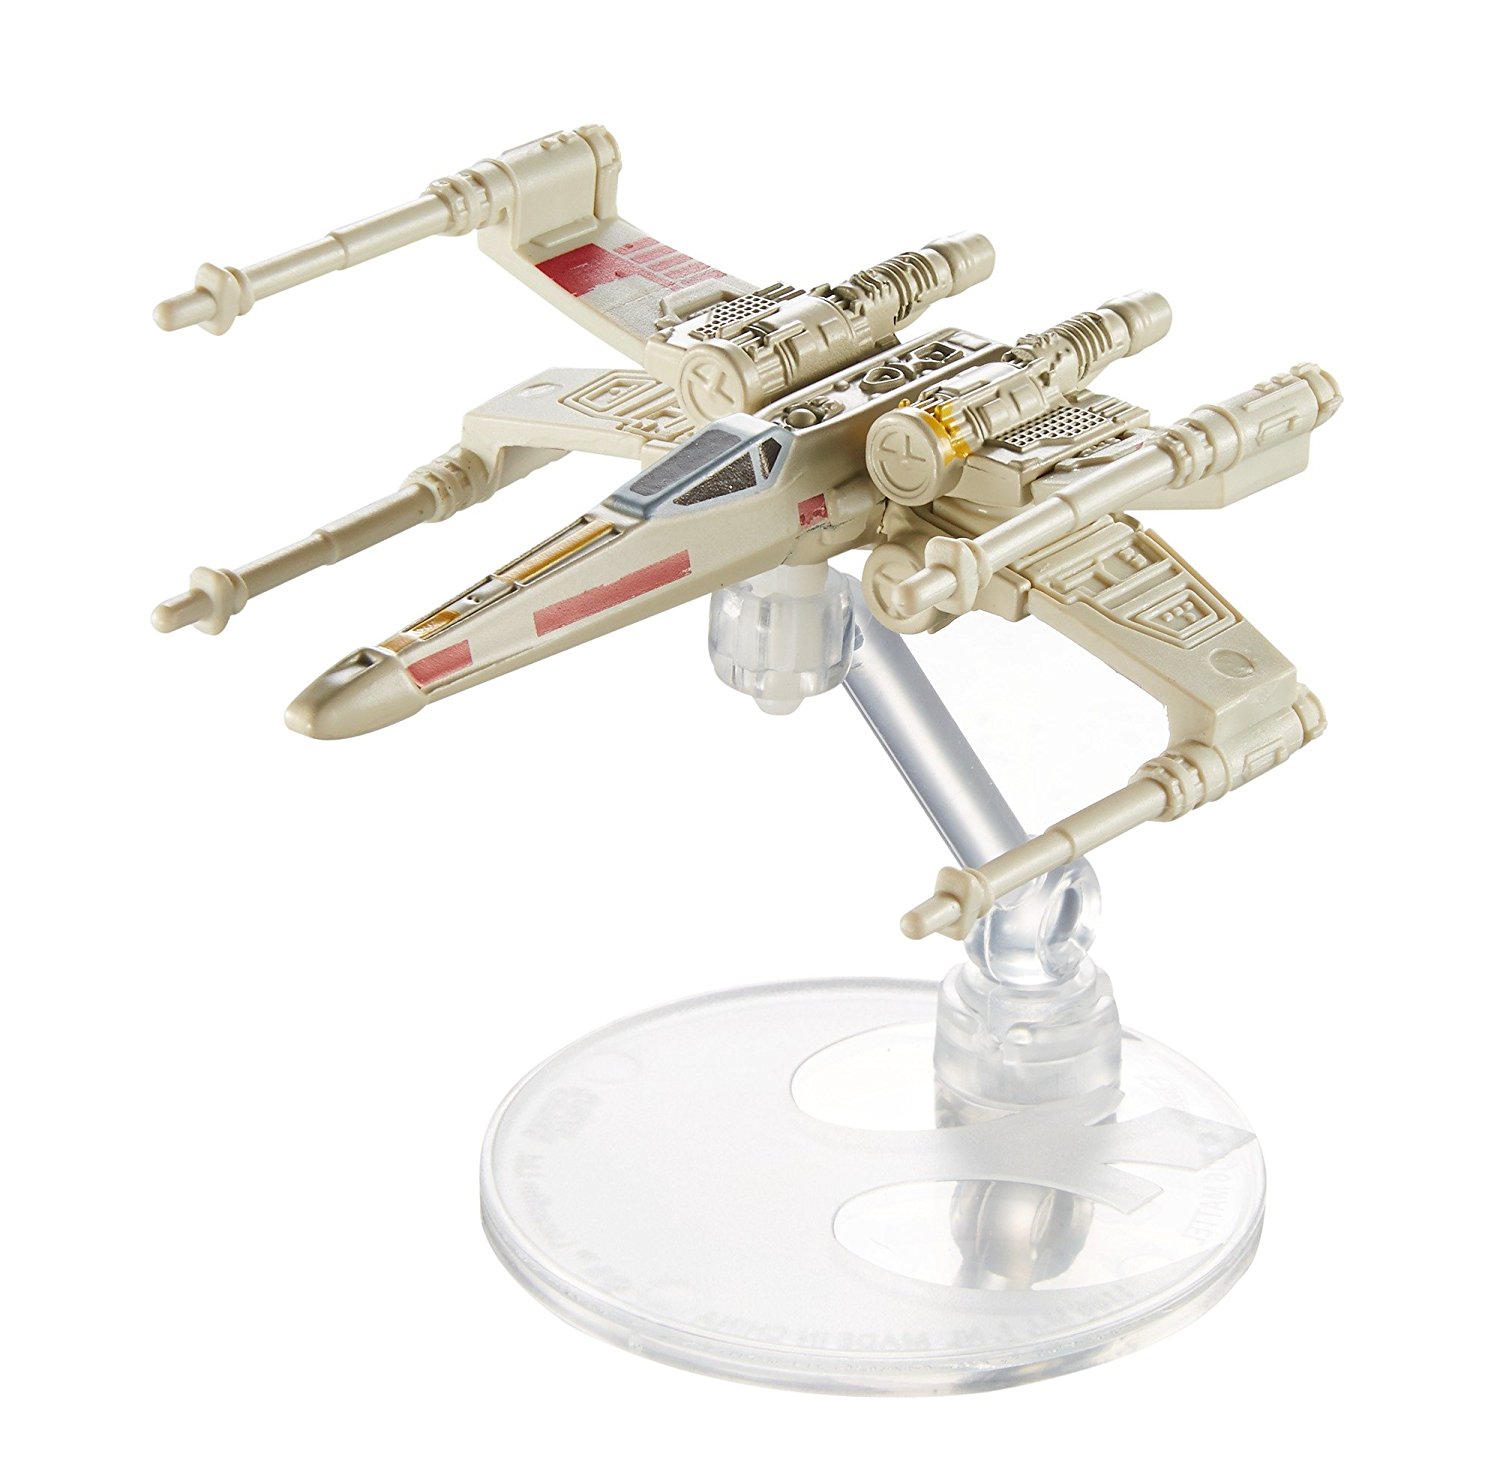 X-Wing Fighter (Red Five)